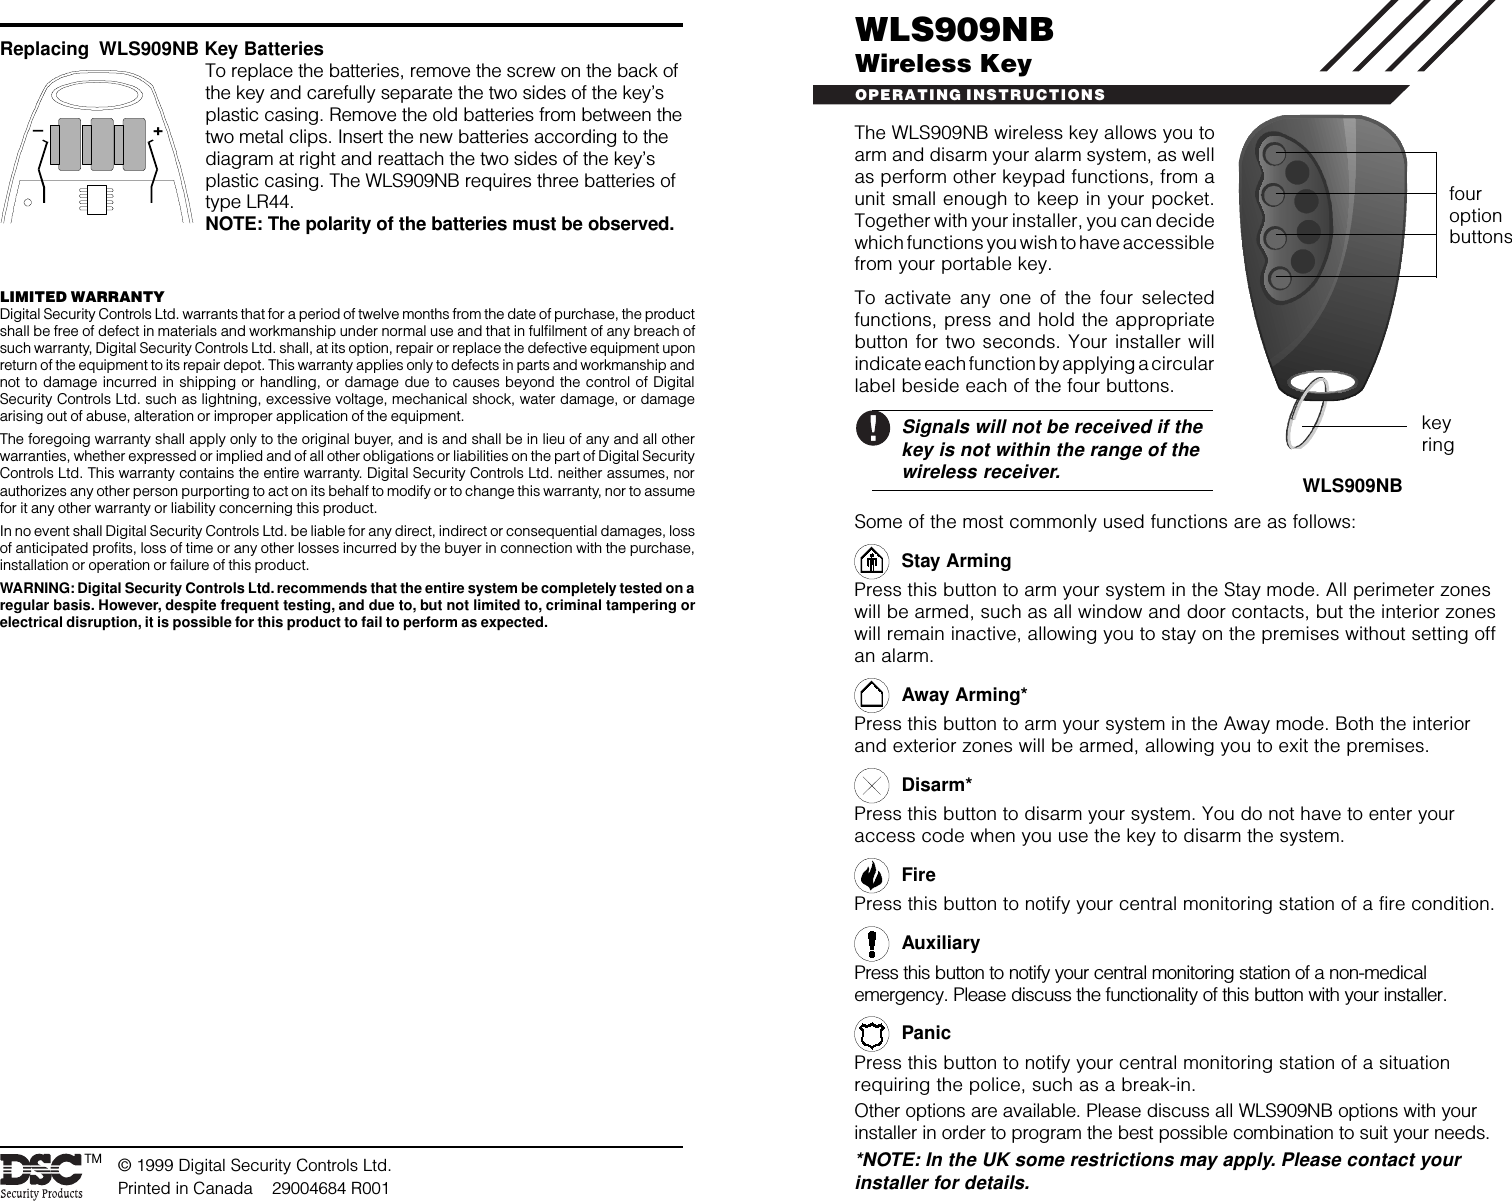 WLS909NBWireless KeyOPERATING INSTRUCTIONS© 1999 Digital Security Controls Ltd.Printed in Canada    29004684 R001Replacing  WLS909NB Key BatteriesTo replace the batteries, remove the screw on the back ofthe key and carefully separate the two sides of the key’splastic casing. Remove the old batteries from between thetwo metal clips. Insert the new batteries according to thediagram at right and reattach the two sides of the key’splastic casing. The WLS909NB requires three batteries oftype LR44.NOTE: The polarity of the batteries must be observed.WLS909NBTMkeyringfouroptionbuttons–+LIMITED WARRANTYDigital Security Controls Ltd. warrants that for a period of twelve months from the date of purchase, the productshall be free of defect in materials and workmanship under normal use and that in fulfilment of any breach ofsuch warranty, Digital Security Controls Ltd. shall, at its option, repair or replace the defective equipment uponreturn of the equipment to its repair depot. This warranty applies only to defects in parts and workmanship andnot to damage incurred in shipping or handling, or damage due to causes beyond the control of DigitalSecurity Controls Ltd. such as lightning, excessive voltage, mechanical shock, water damage, or damagearising out of abuse, alteration or improper application of the equipment.The foregoing warranty shall apply only to the original buyer, and is and shall be in lieu of any and all otherwarranties, whether expressed or implied and of all other obligations or liabilities on the part of Digital SecurityControls Ltd. This warranty contains the entire warranty. Digital Security Controls Ltd. neither assumes, norauthorizes any other person purporting to act on its behalf to modify or to change this warranty, nor to assumefor it any other warranty or liability concerning this product.In no event shall Digital Security Controls Ltd. be liable for any direct, indirect or consequential damages, lossof anticipated profits, loss of time or any other losses incurred by the buyer in connection with the purchase,installation or operation or failure of this product.WARNING: Digital Security Controls Ltd. recommends that the entire system be completely tested on aregular basis. However, despite frequent testing, and due to, but not limited to, criminal tampering orelectrical disruption, it is possible for this product to fail to perform as expected.The WLS909NB wireless key allows you toarm and disarm your alarm system, as wellas perform other keypad functions, from aunit small enough to keep in your pocket.Together with your installer, you can decidewhich functions you wish to have accessiblefrom your portable key.To activate any one of the four selectedfunctions, press and hold the appropriatebutton for two seconds. Your installer willindicate each function by applying a circularlabel beside each of the four buttons.Signals will not be received if thekey is not within the range of thewireless receiver.Some of the most commonly used functions are as follows:Stay ArmingPress this button to arm your system in the Stay mode. All perimeter zoneswill be armed, such as all window and door contacts, but the interior zoneswill remain inactive, allowing you to stay on the premises without setting offan alarm.Away Arming*Press this button to arm your system in the Away mode. Both the interiorand exterior zones will be armed, allowing you to exit the premises.Disarm*Press this button to disarm your system. You do not have to enter youraccess code when you use the key to disarm the system.FirePress this button to notify your central monitoring station of a fire condition.AuxiliaryPress this button to notify your central monitoring station of a non-medicalemergency. Please discuss the functionality of this button with your installer.PanicPress this button to notify your central monitoring station of a situationrequiring the police, such as a break-in.Other options are available. Please discuss all WLS909NB options with yourinstaller in order to program the best possible combination to suit your needs.*NOTE: In the UK some restrictions may apply. Please contact yourinstaller for details.